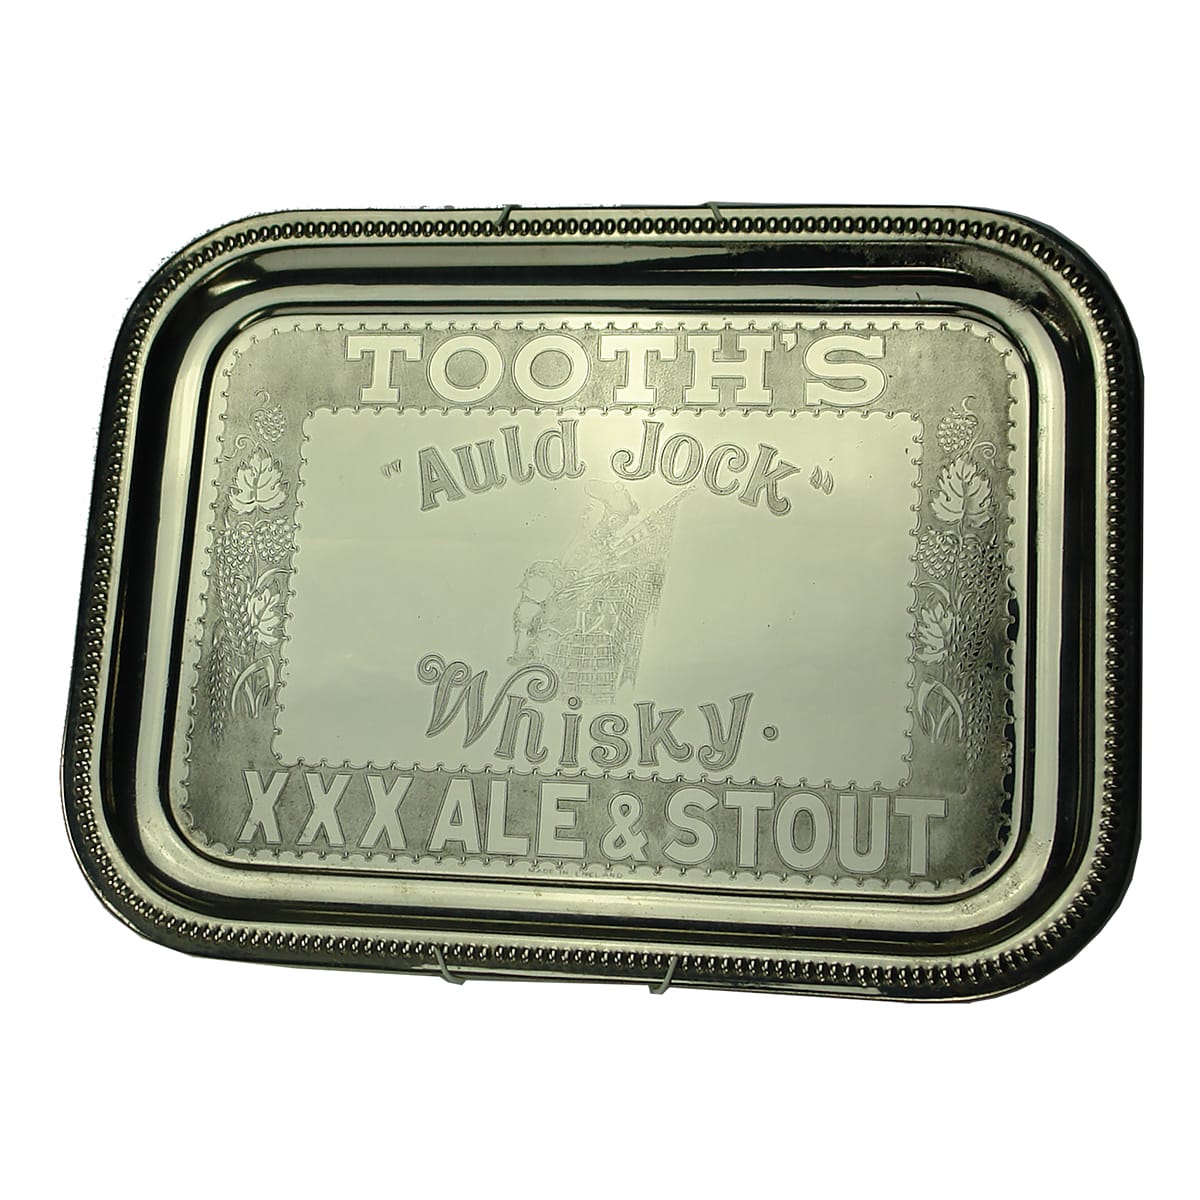 Serving Tray. Tooth's Auld Jock Whisky. XXX Ale & Stout. (Sydney, New South Wales)